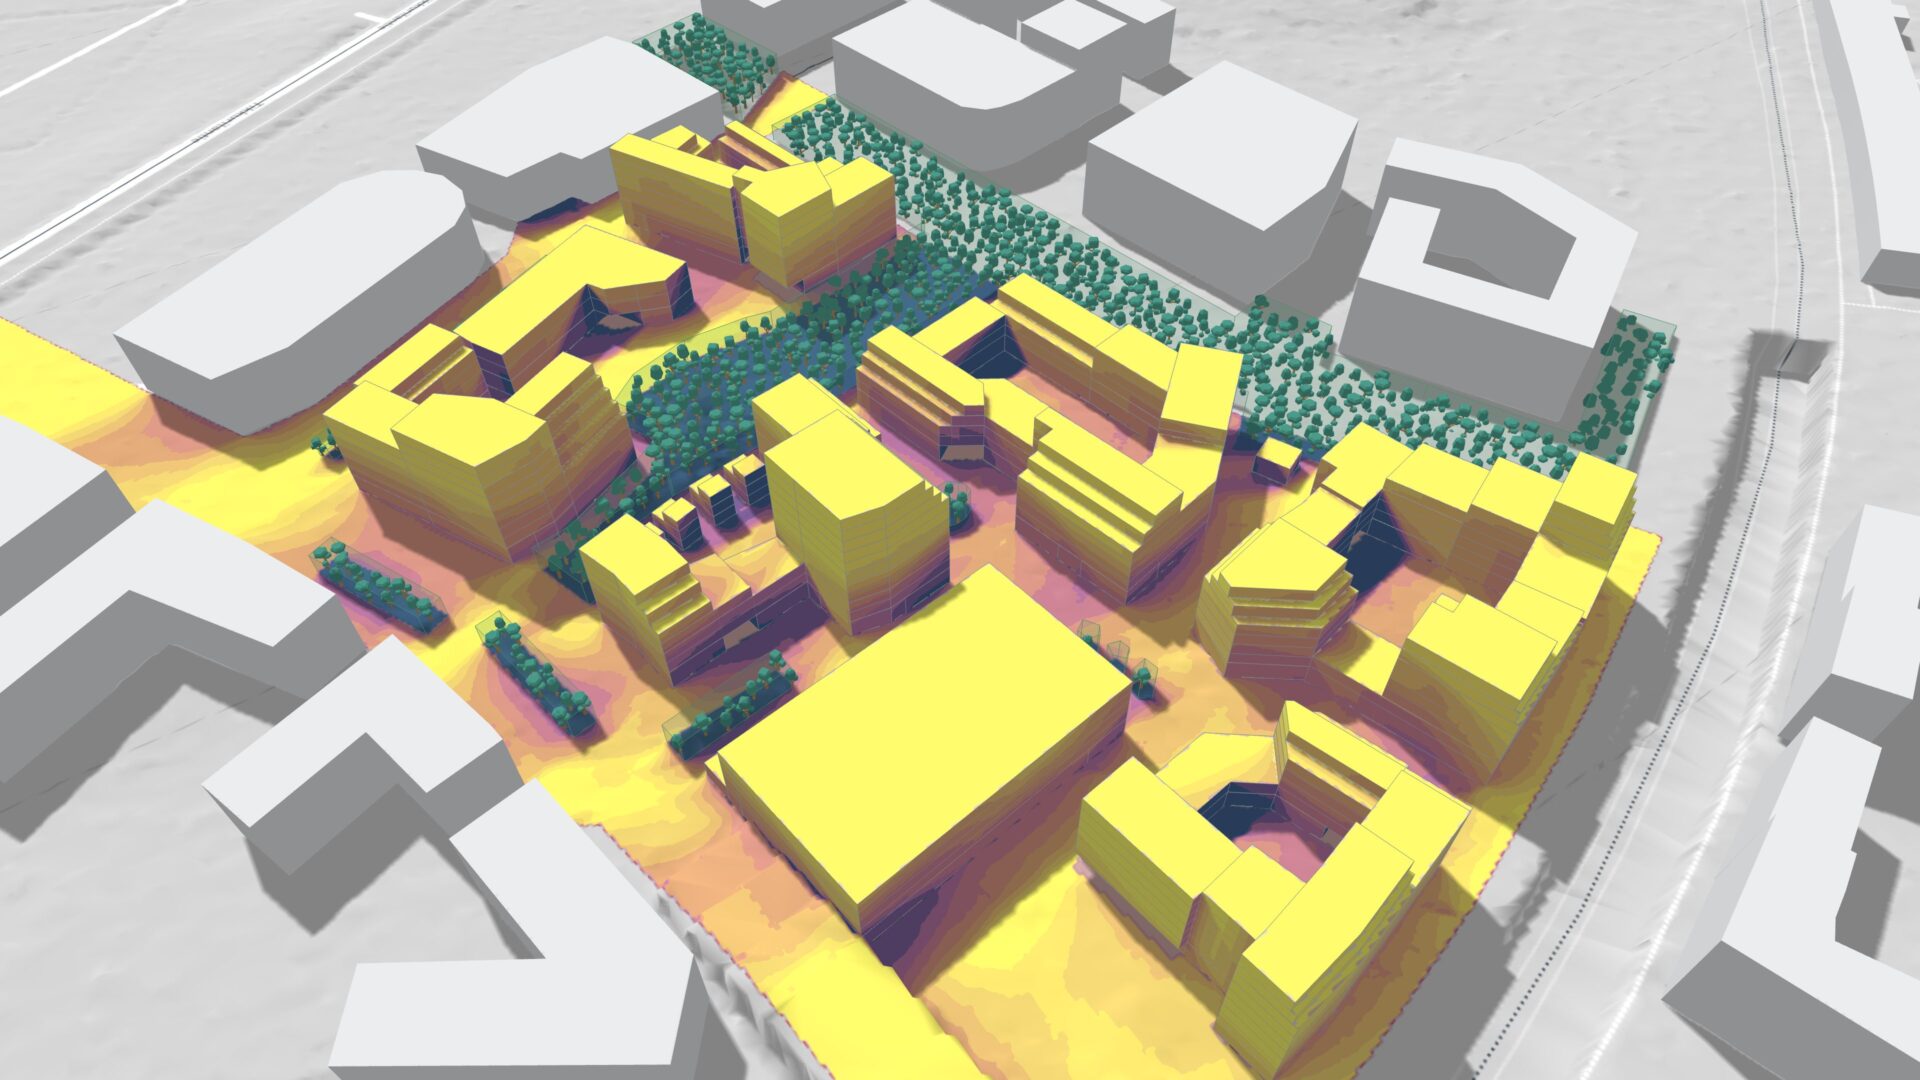 Using Spacemaker’s data-driven insights to optimize living conditions in Kivistö, Finland